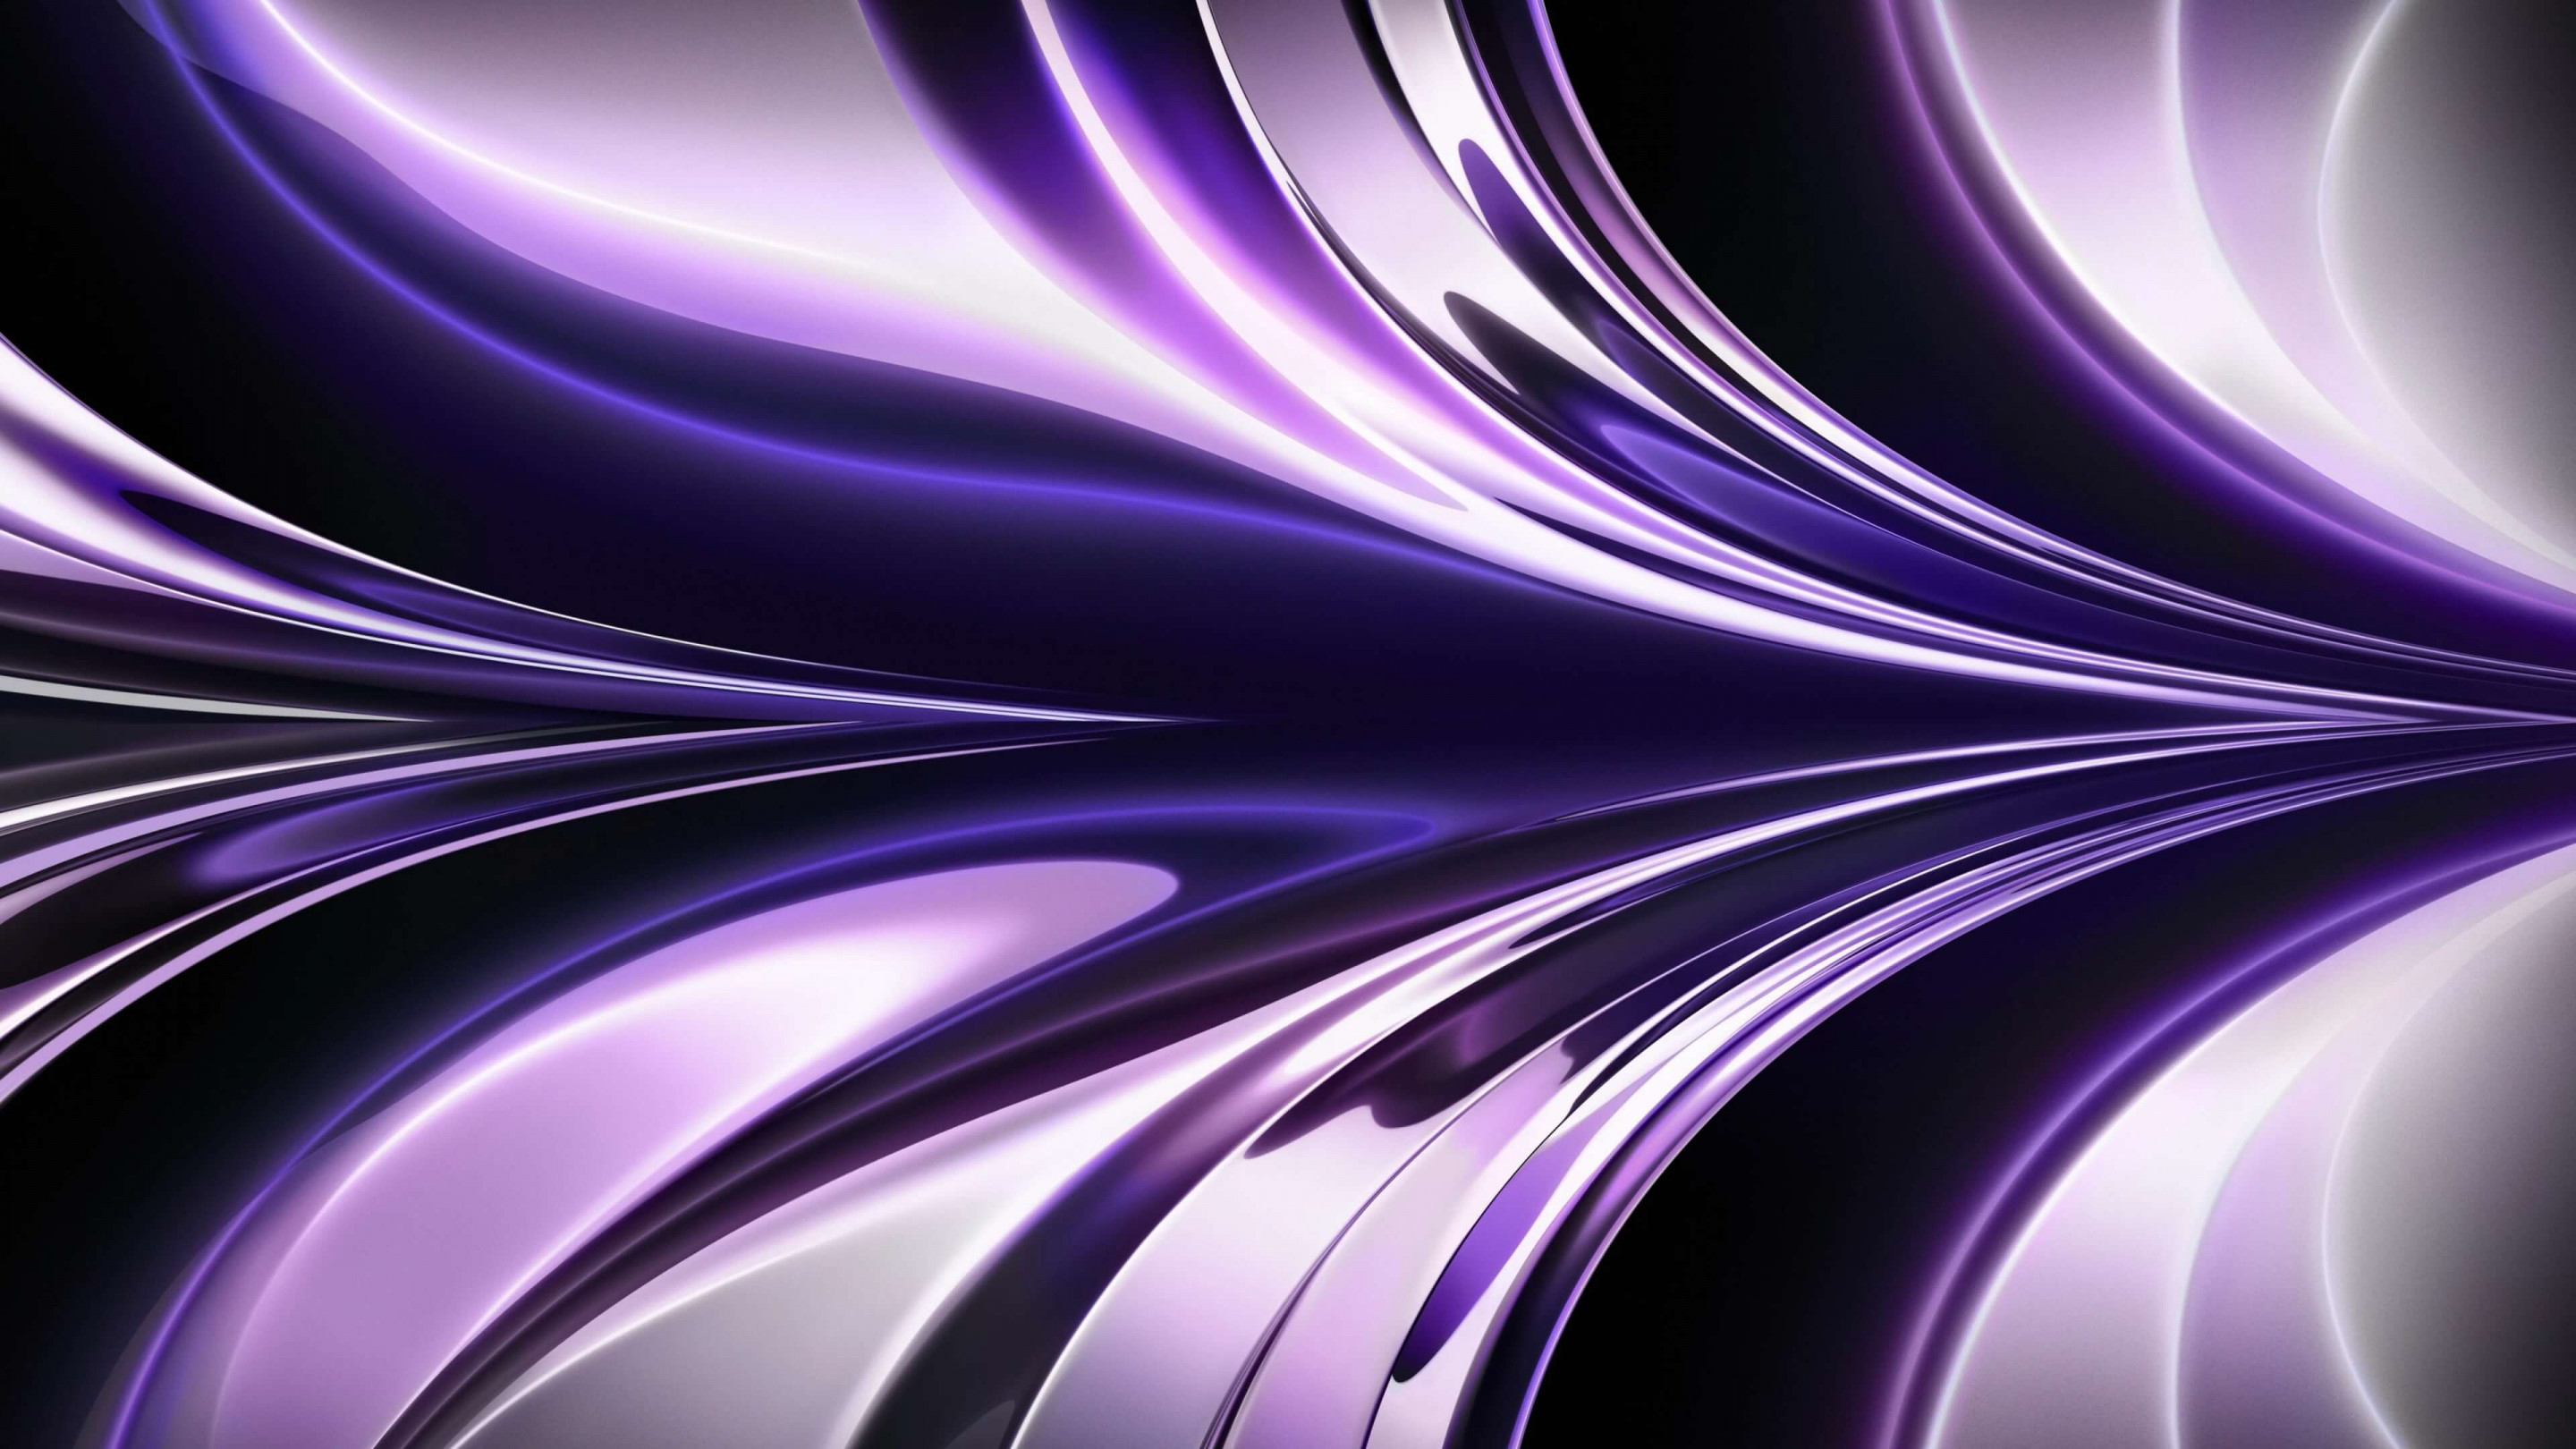 iOS 16 abstract purple style wallpaper 2880x1620